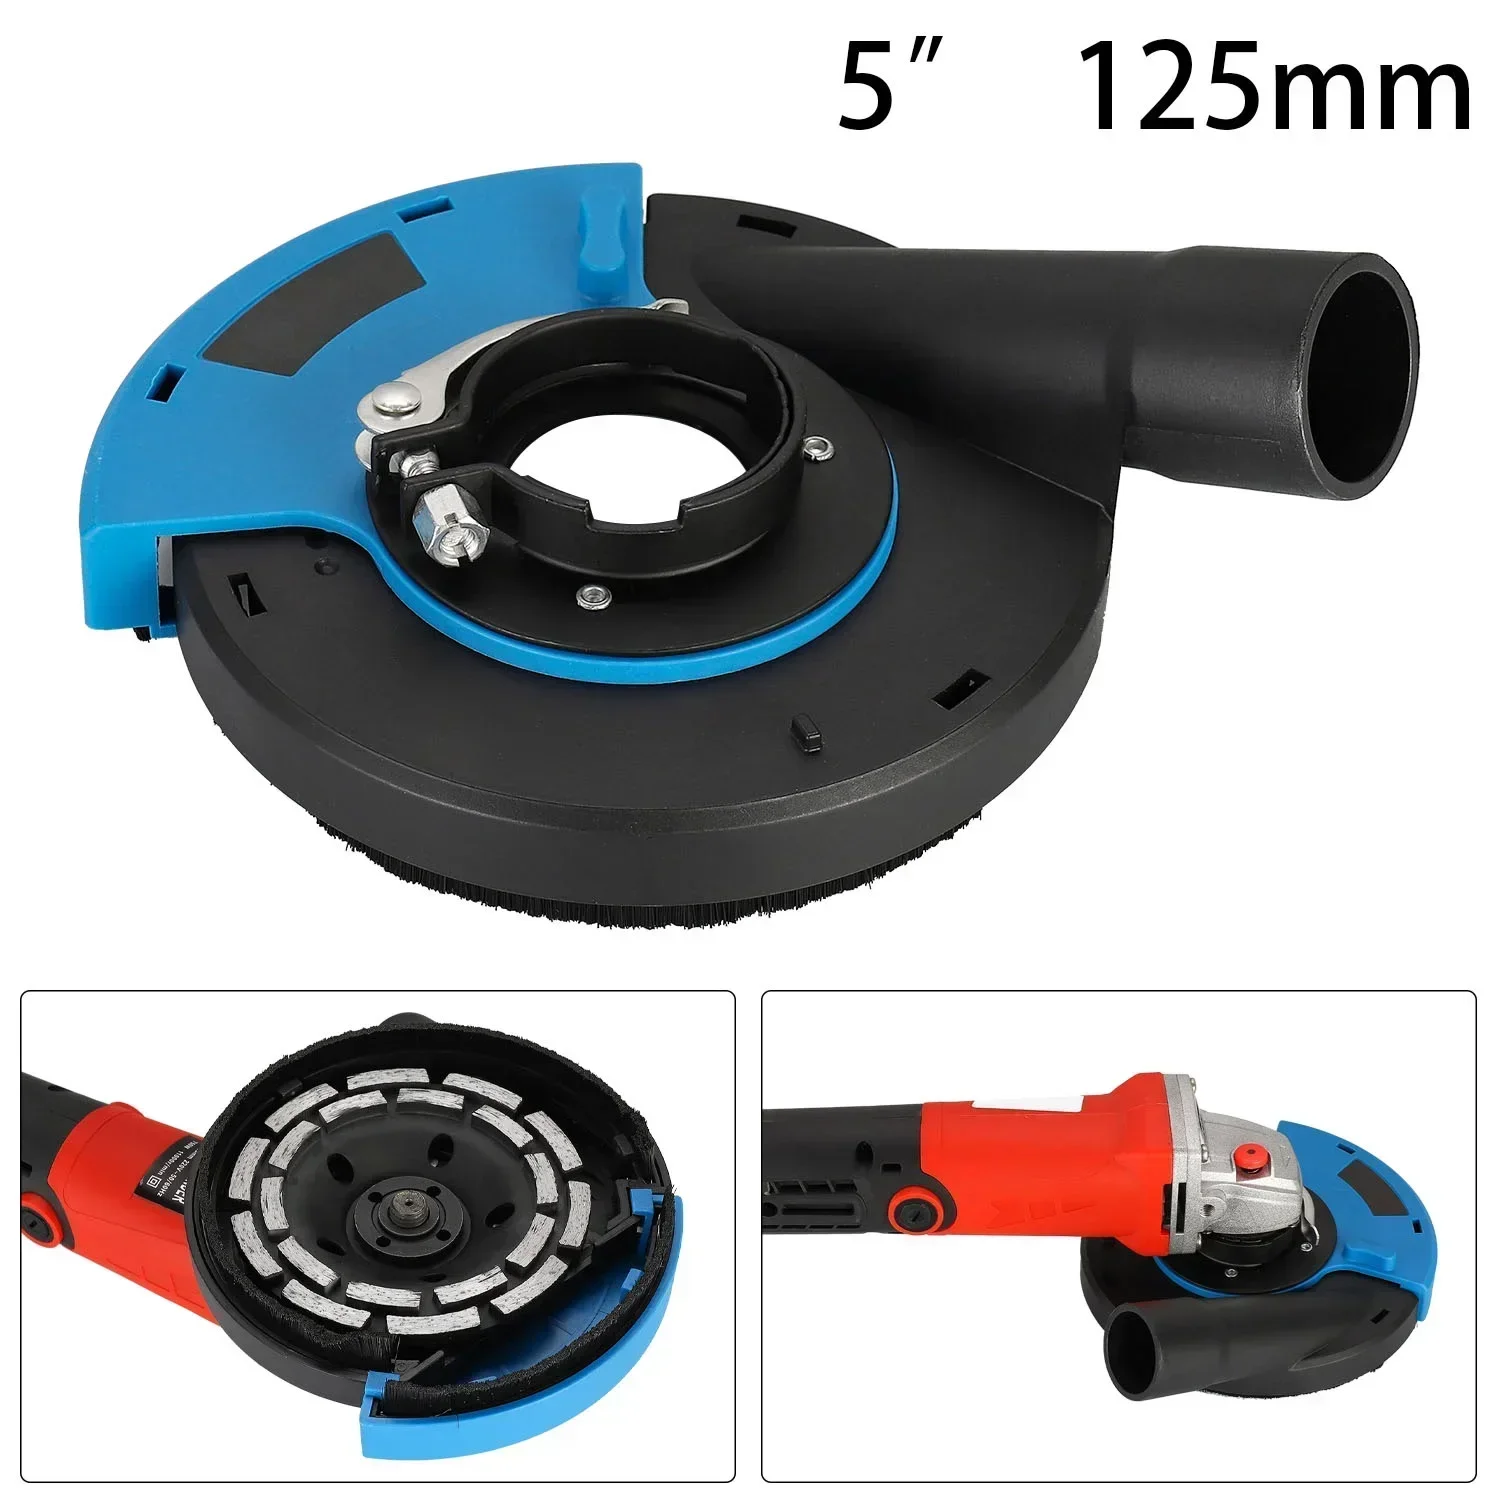 

Hood Grinder 125mm Inch Concrete For Cover 5 Blue Dirt Suction Shroud Removal Angle Dust Black